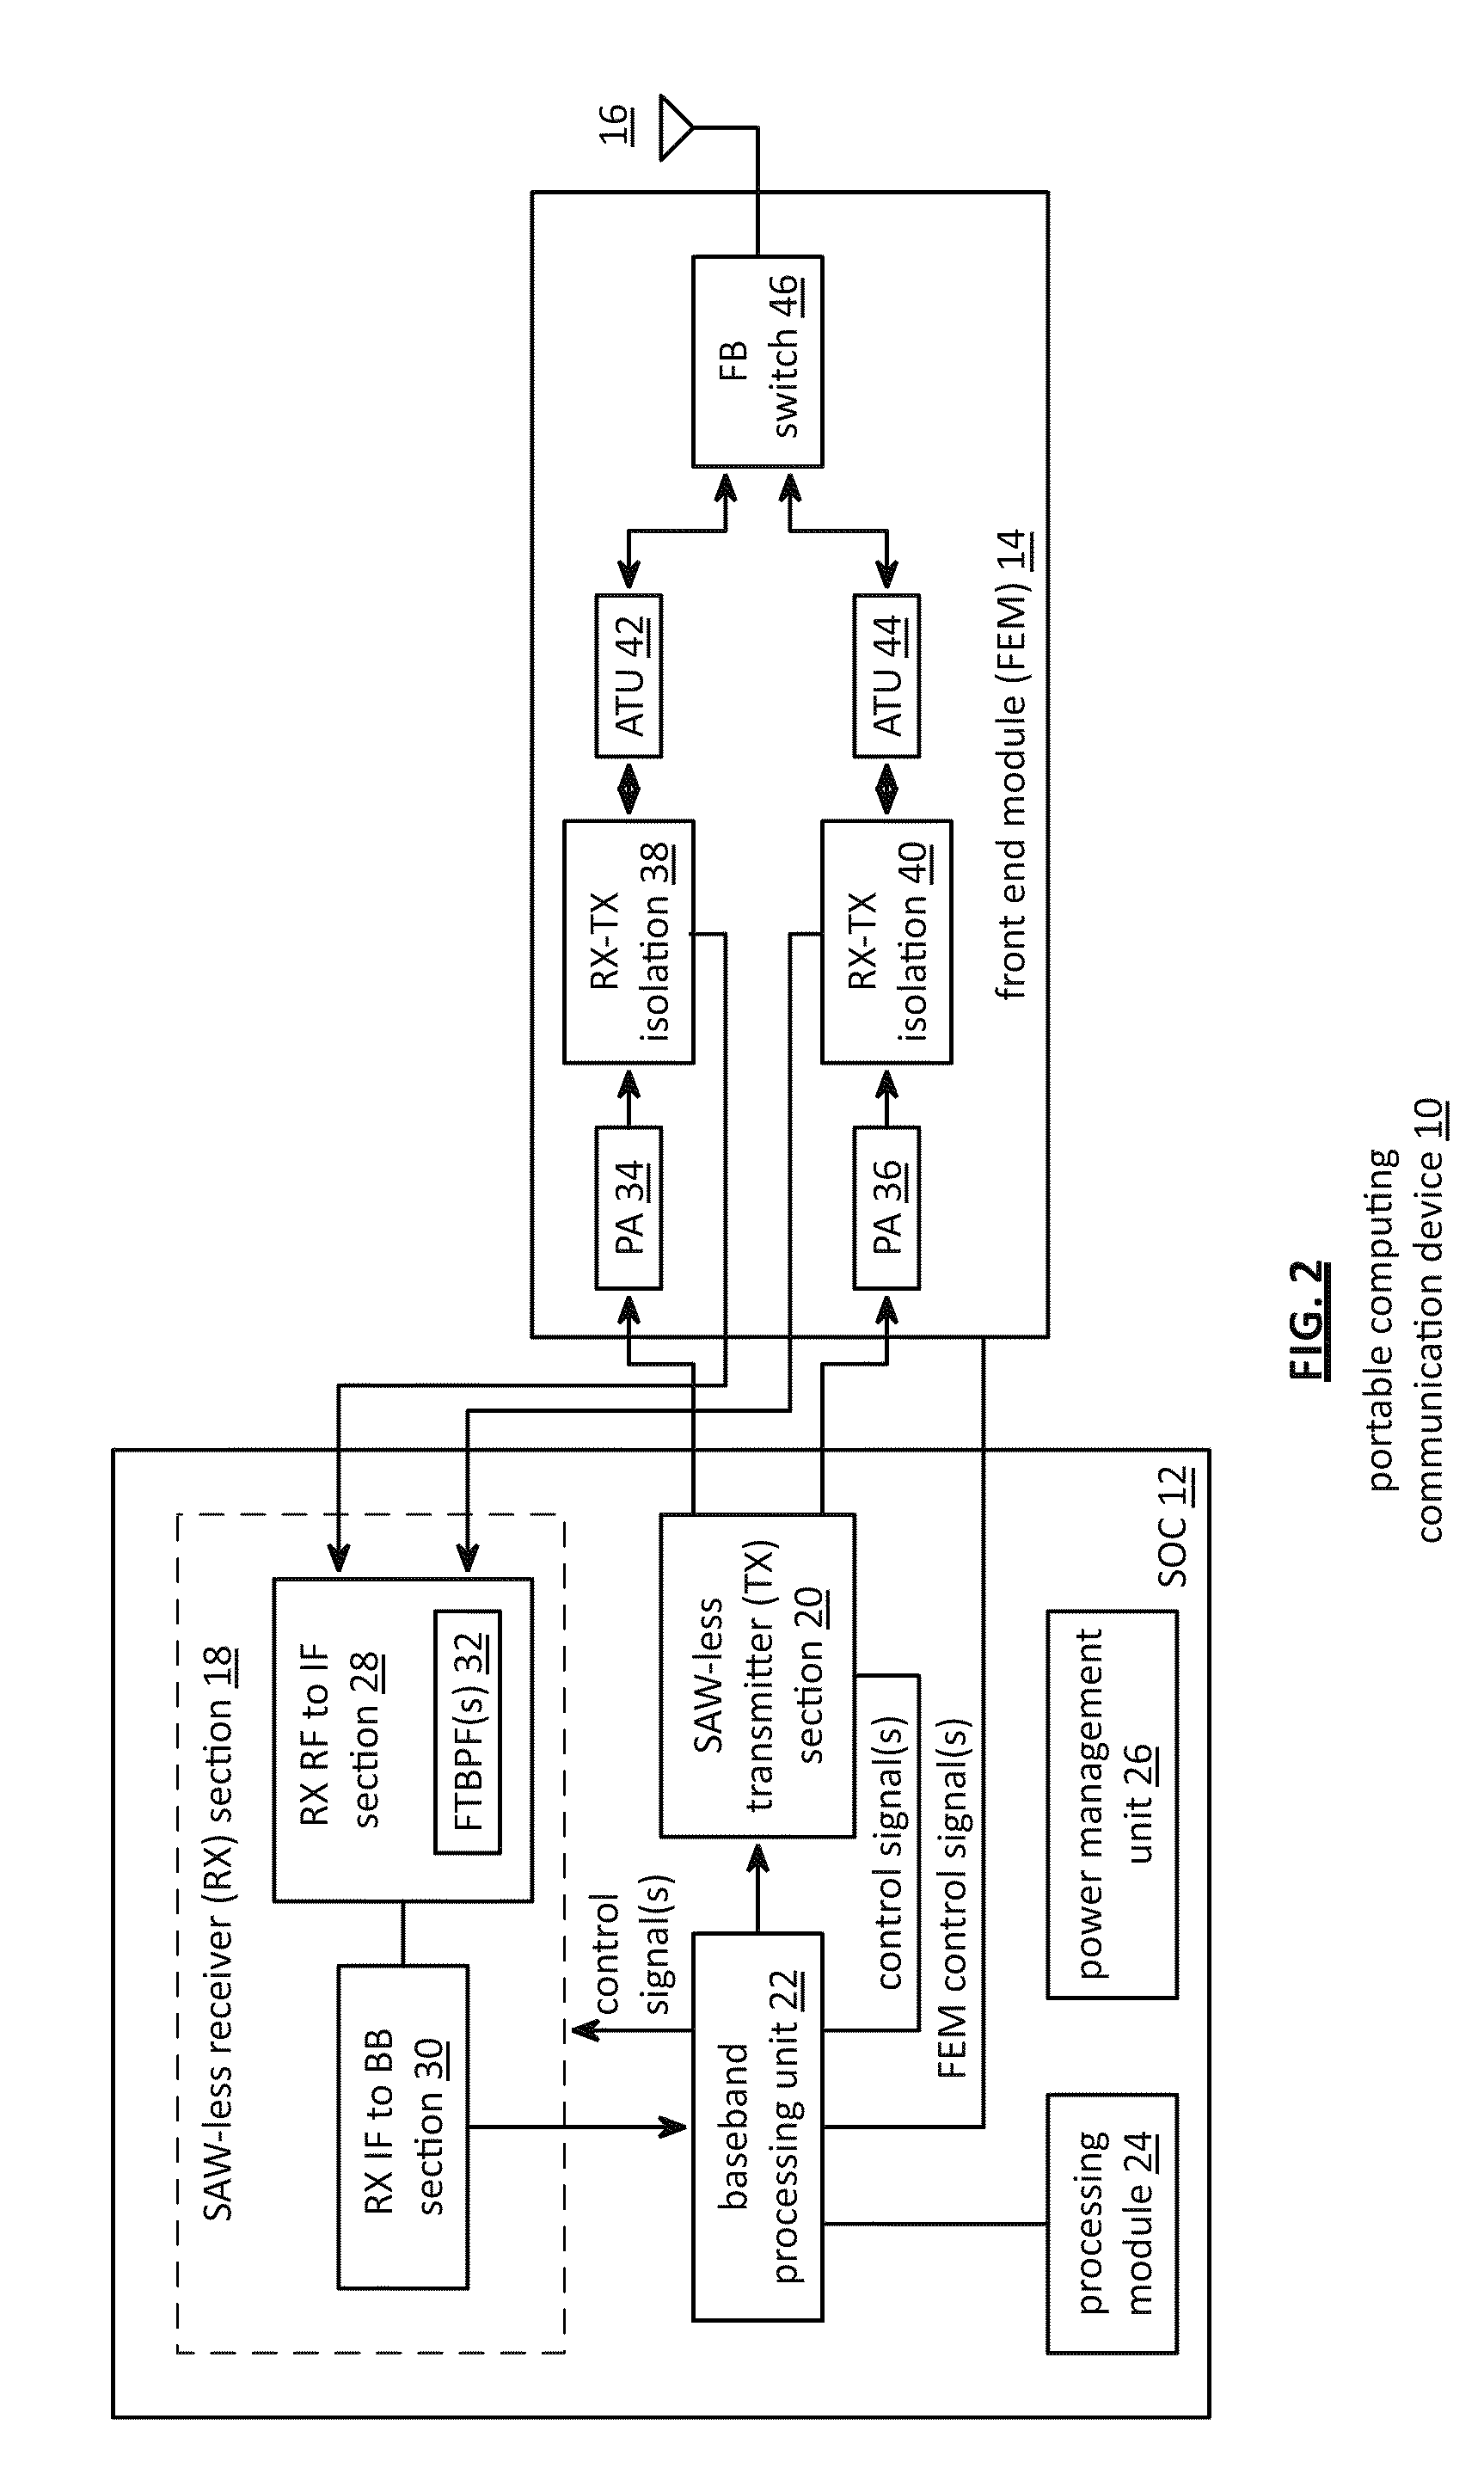 Front end module with a tunable balancing network